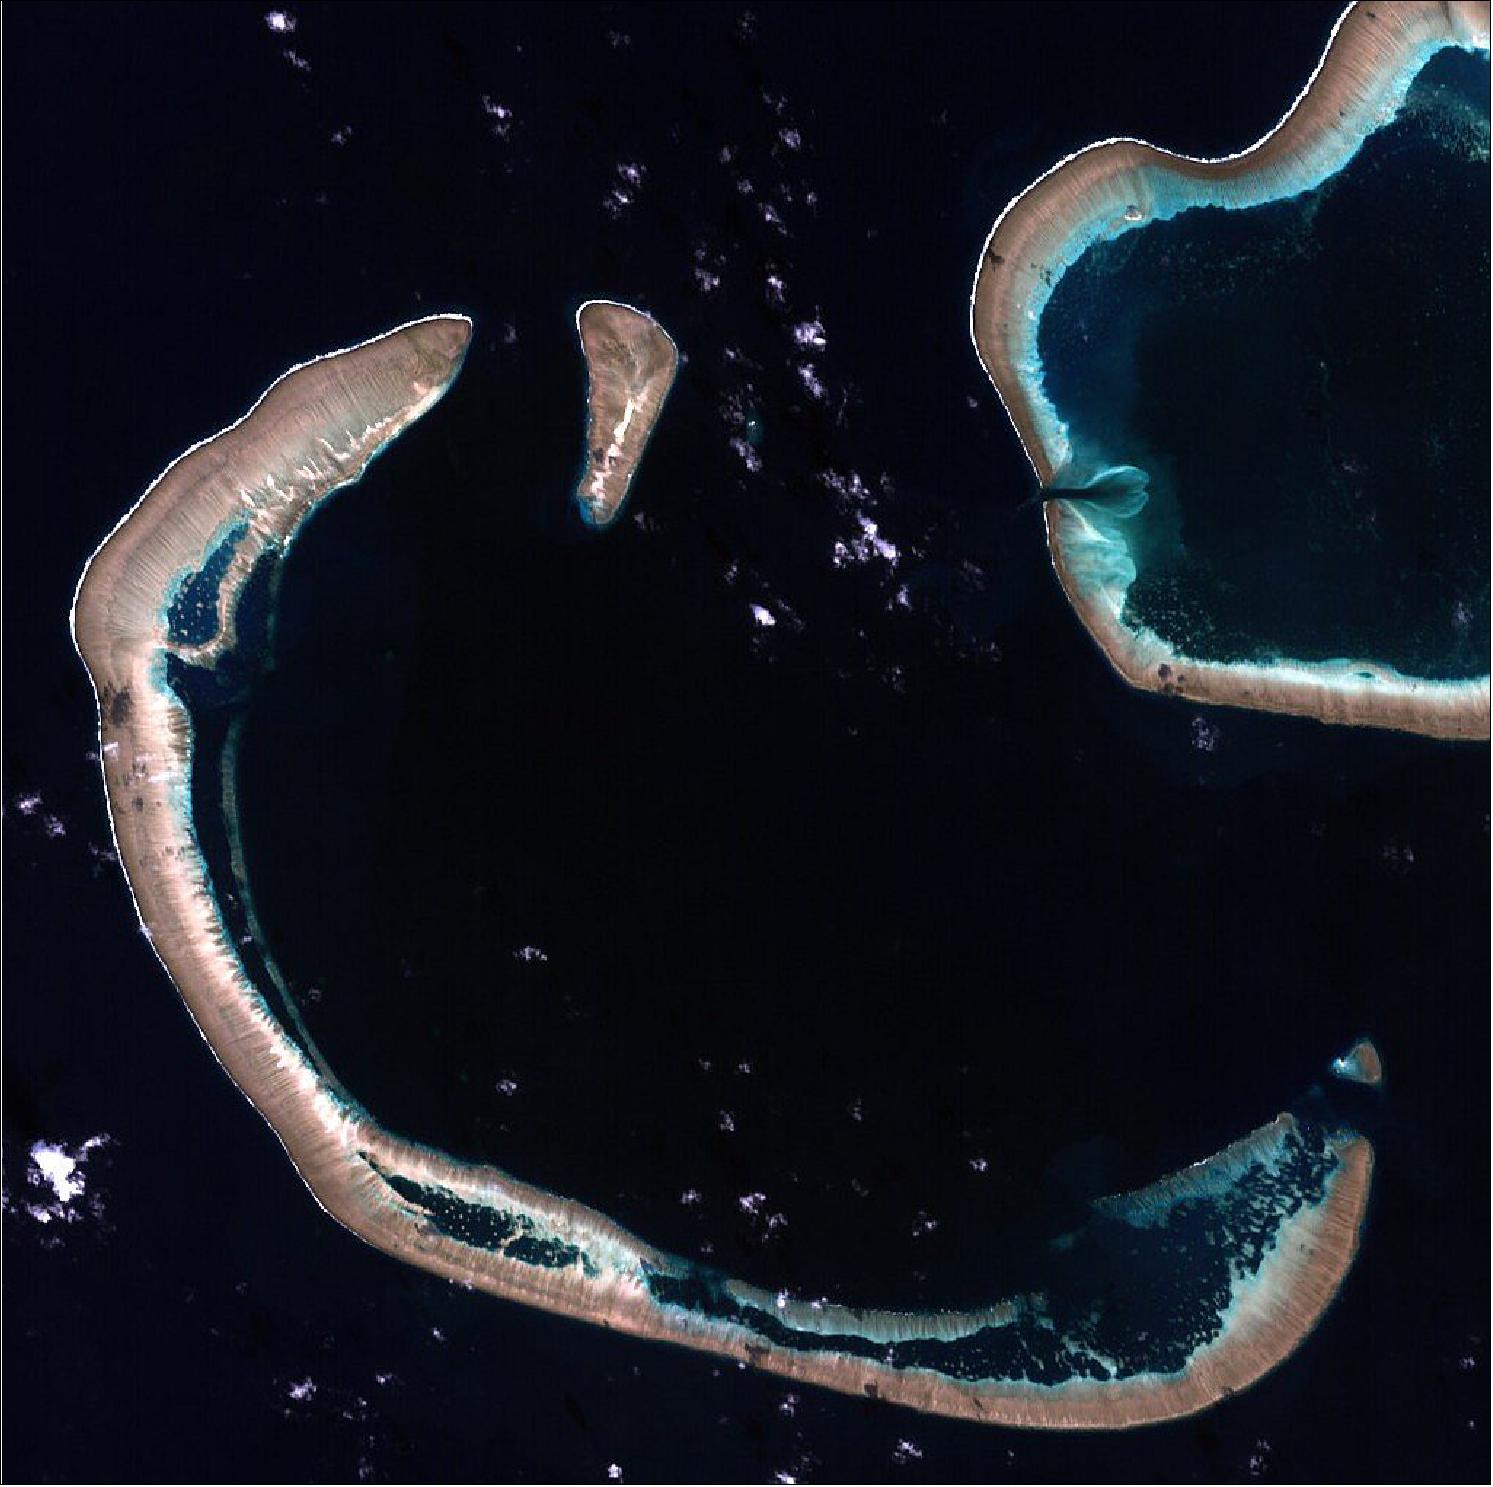 Figure 17: Scott Reef in the Timor Sea, observed with DESIS on 13 January 2020 (image credit: DLR)